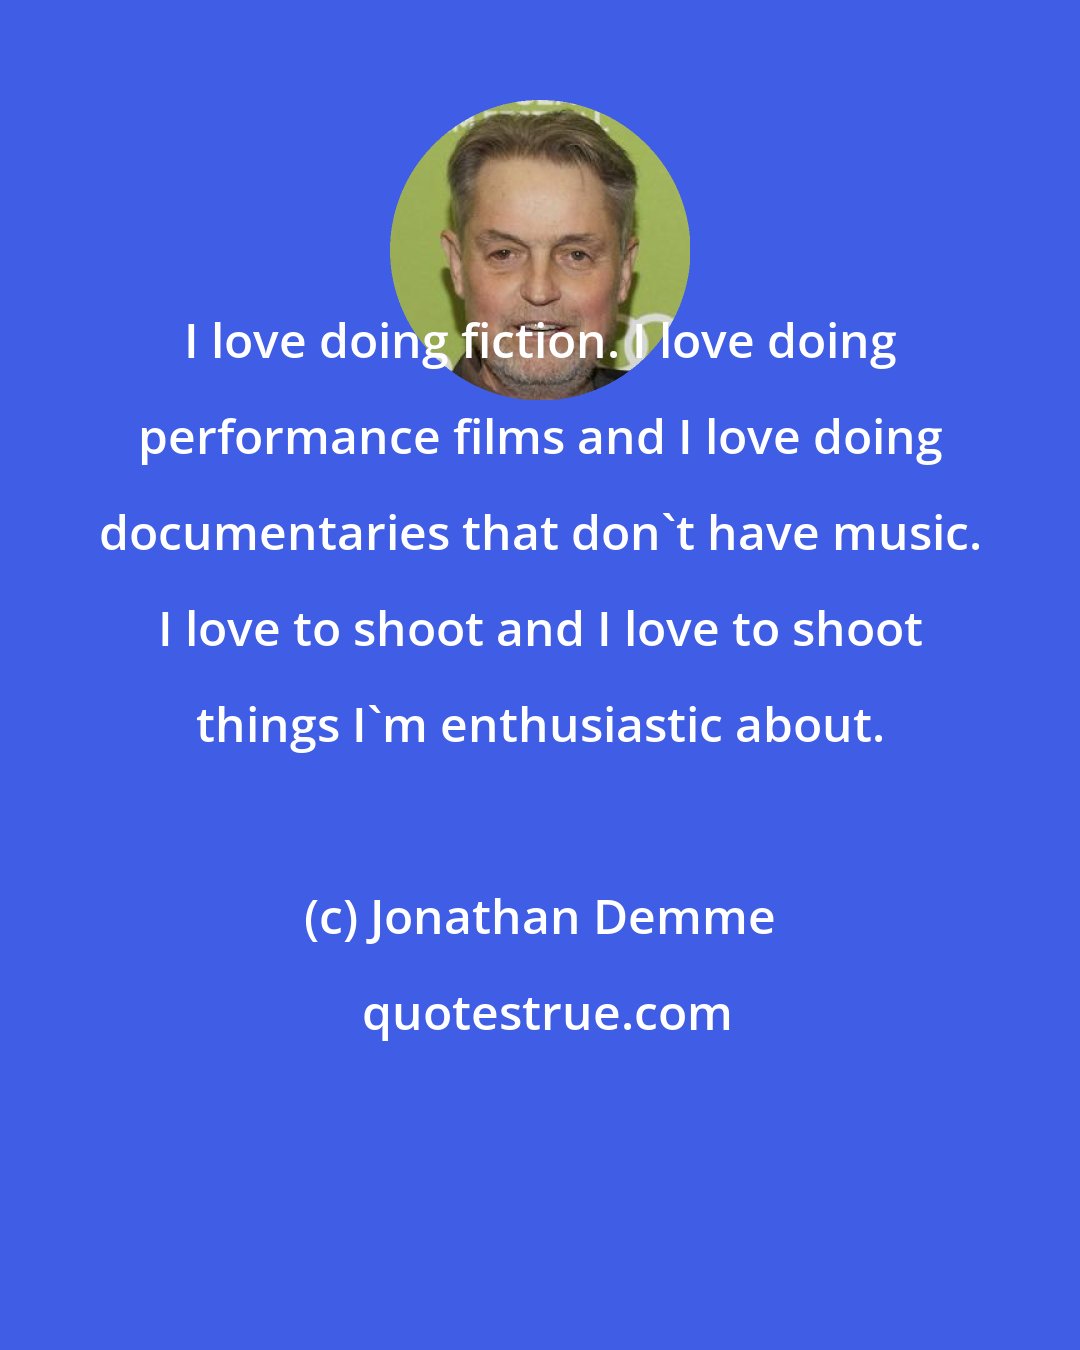 Jonathan Demme: I love doing fiction. I love doing performance films and I love doing documentaries that don't have music. I love to shoot and I love to shoot things I'm enthusiastic about.